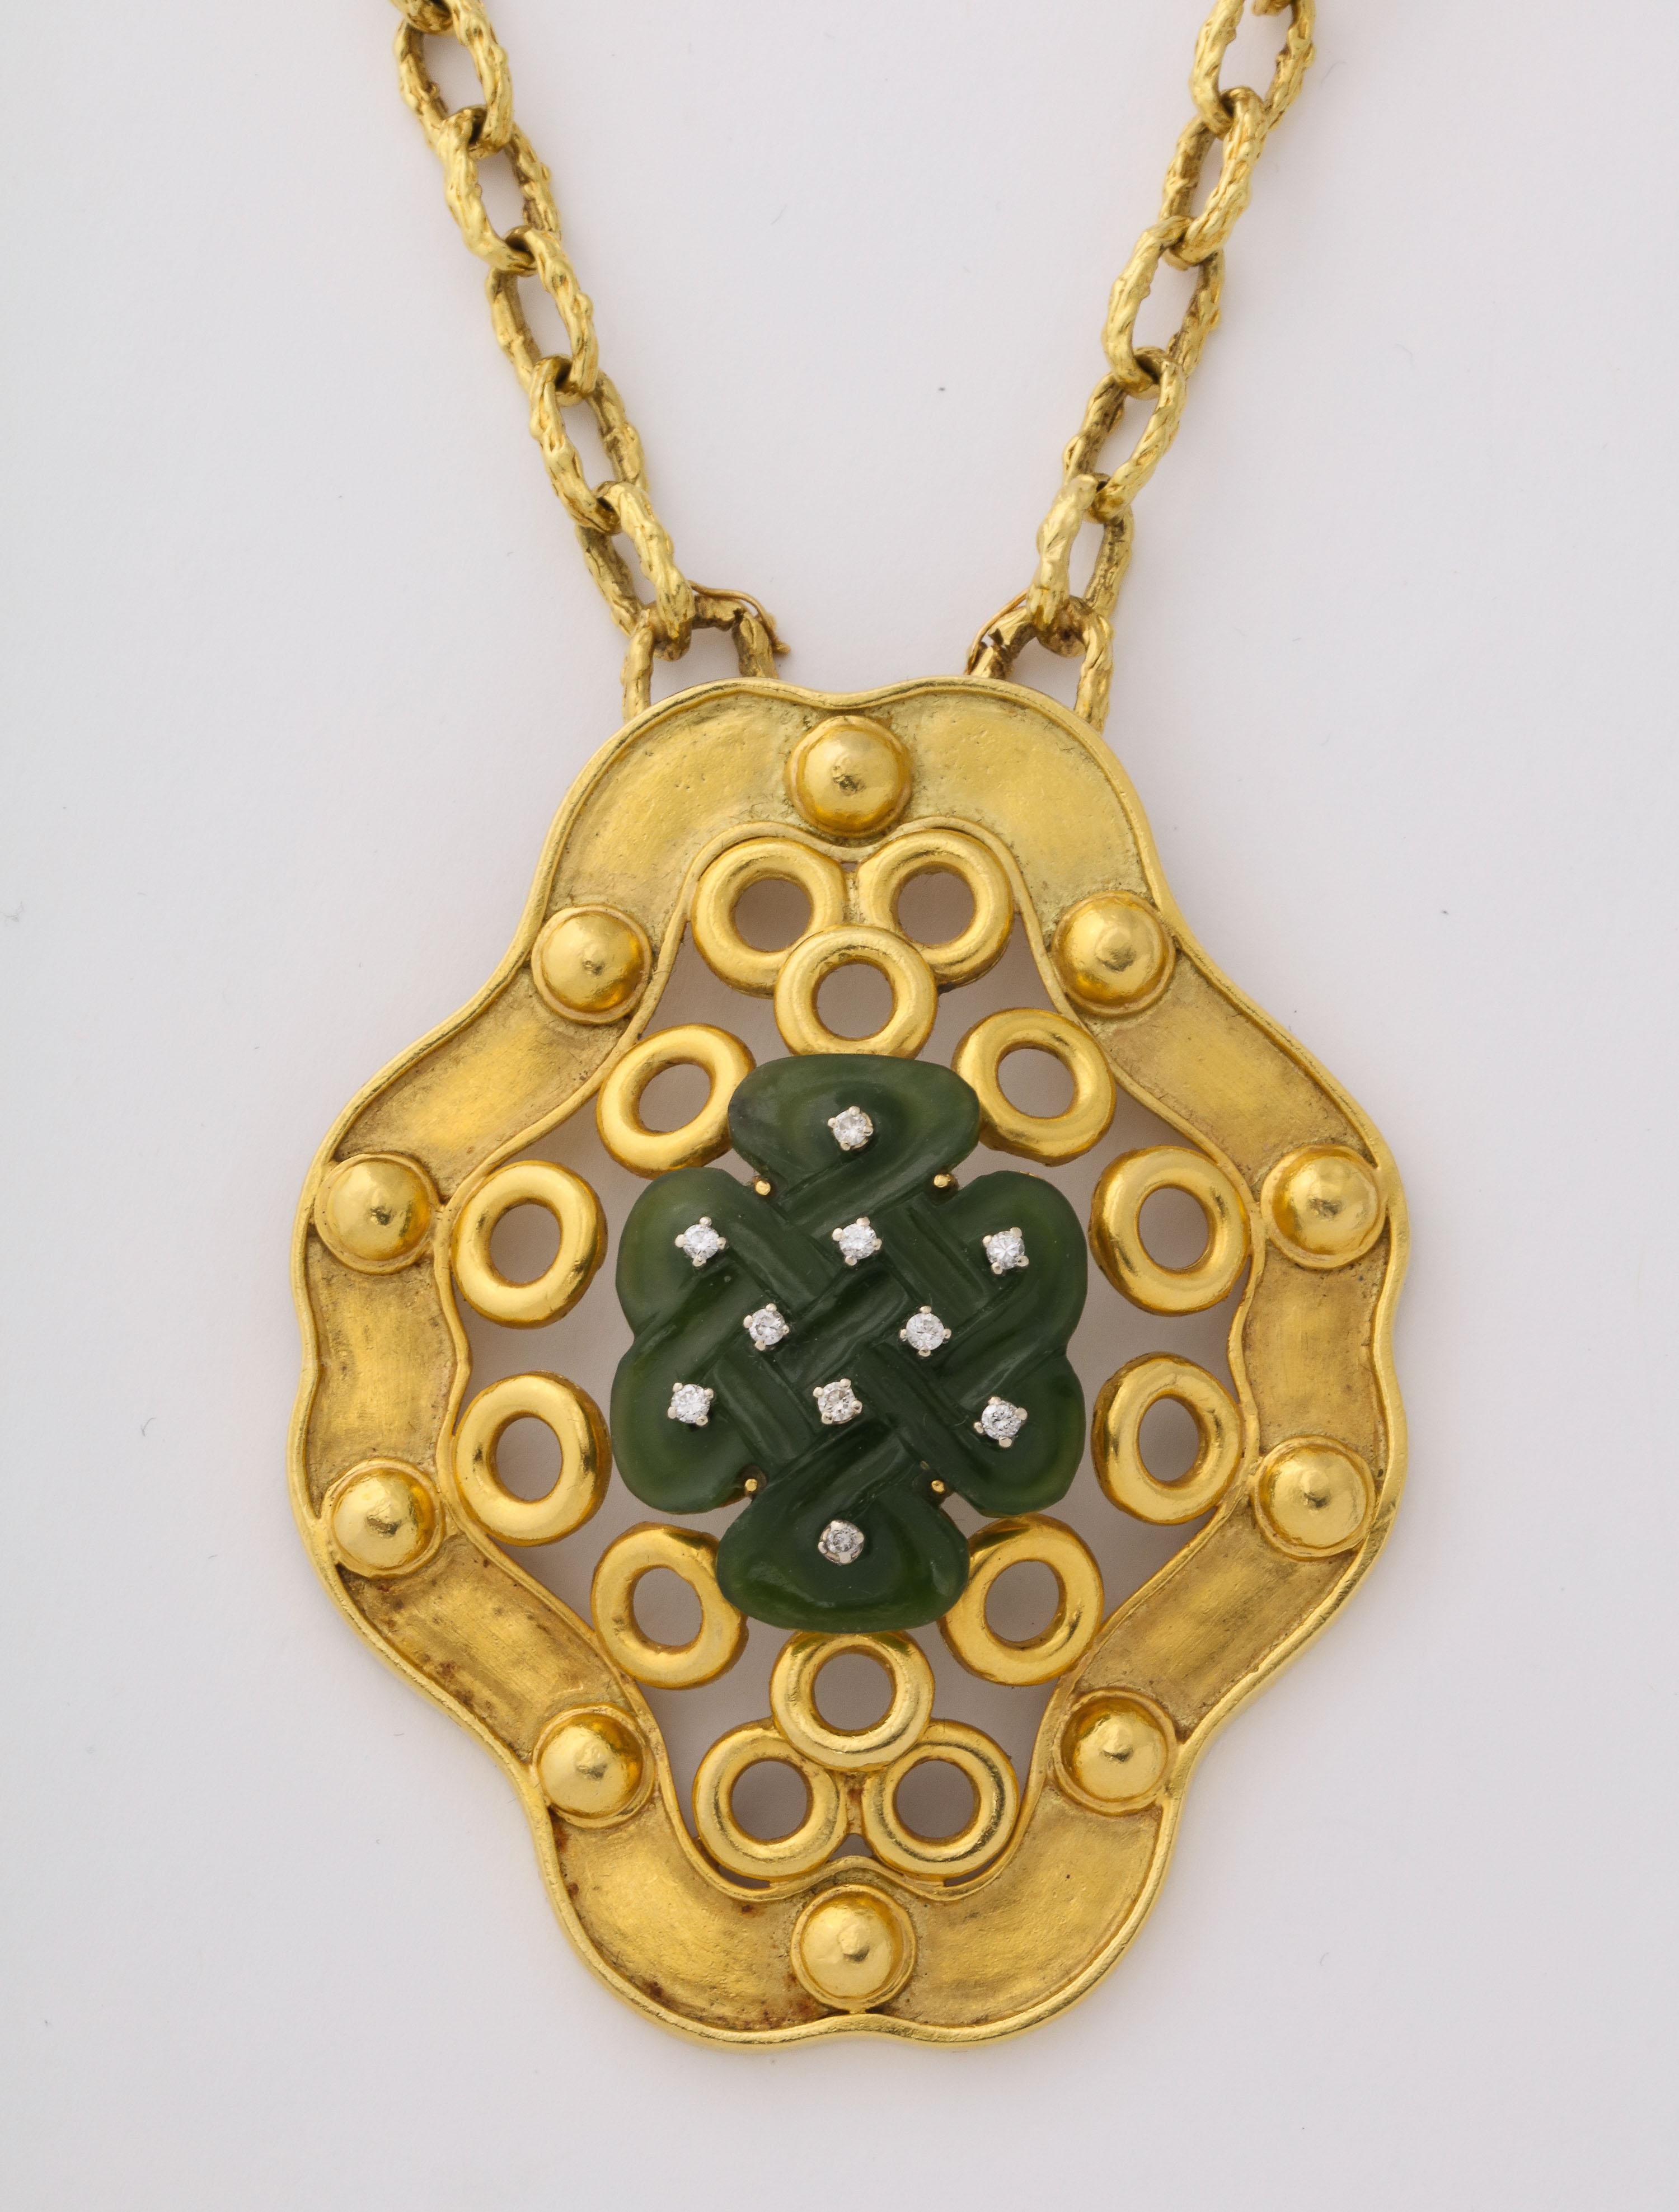 Mixed Cut Oversize Nephrite Pendant on Removable Textured Chain